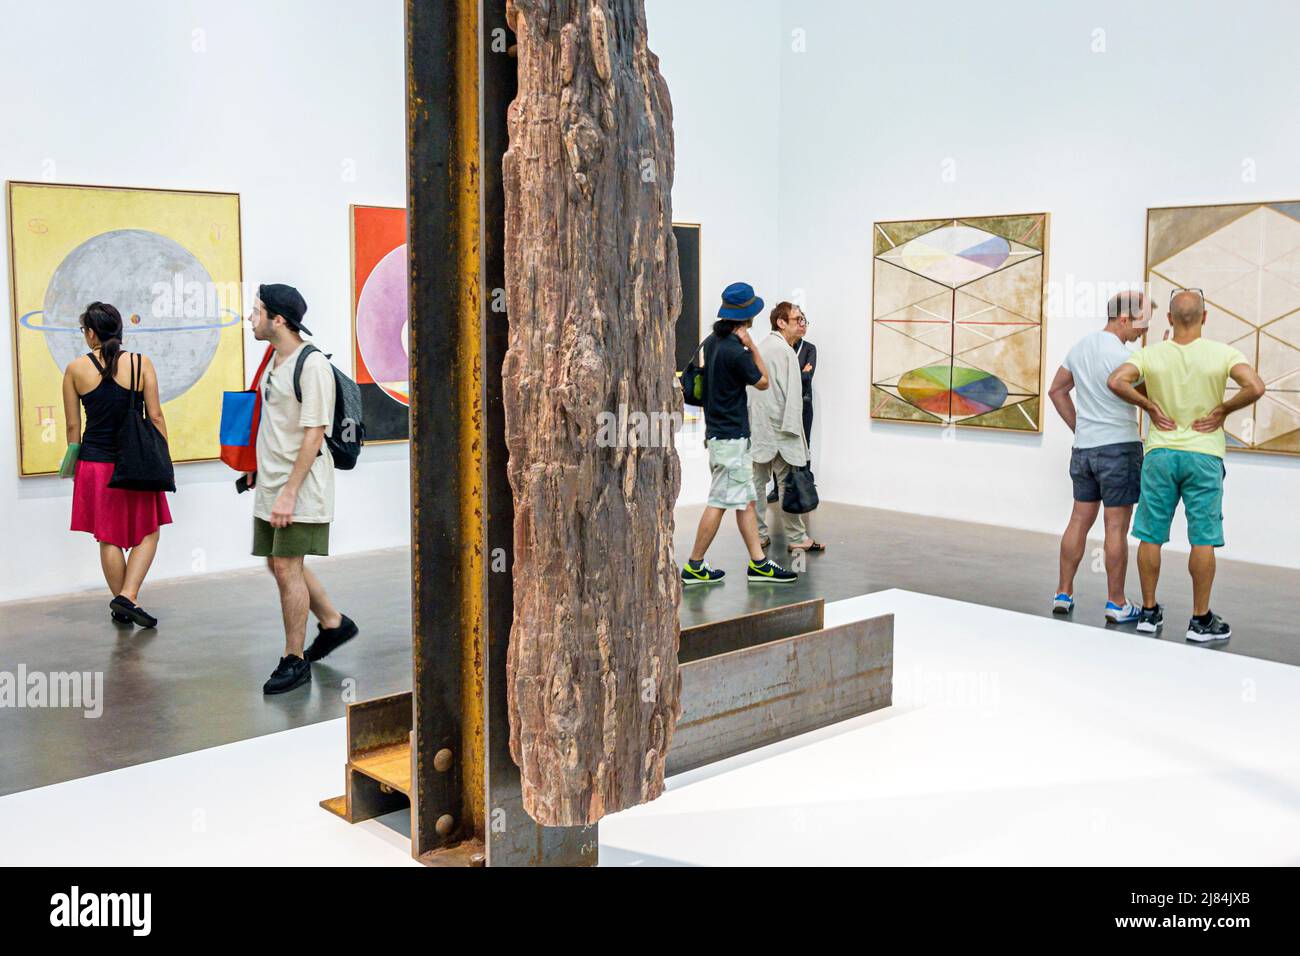 New York City NYC Lower Manhattan,Bowery,New Museum,contemporary art,exhibit The Keeper gallery,Hilma af Klint driftwood sculpture visitors men women Stock Photo